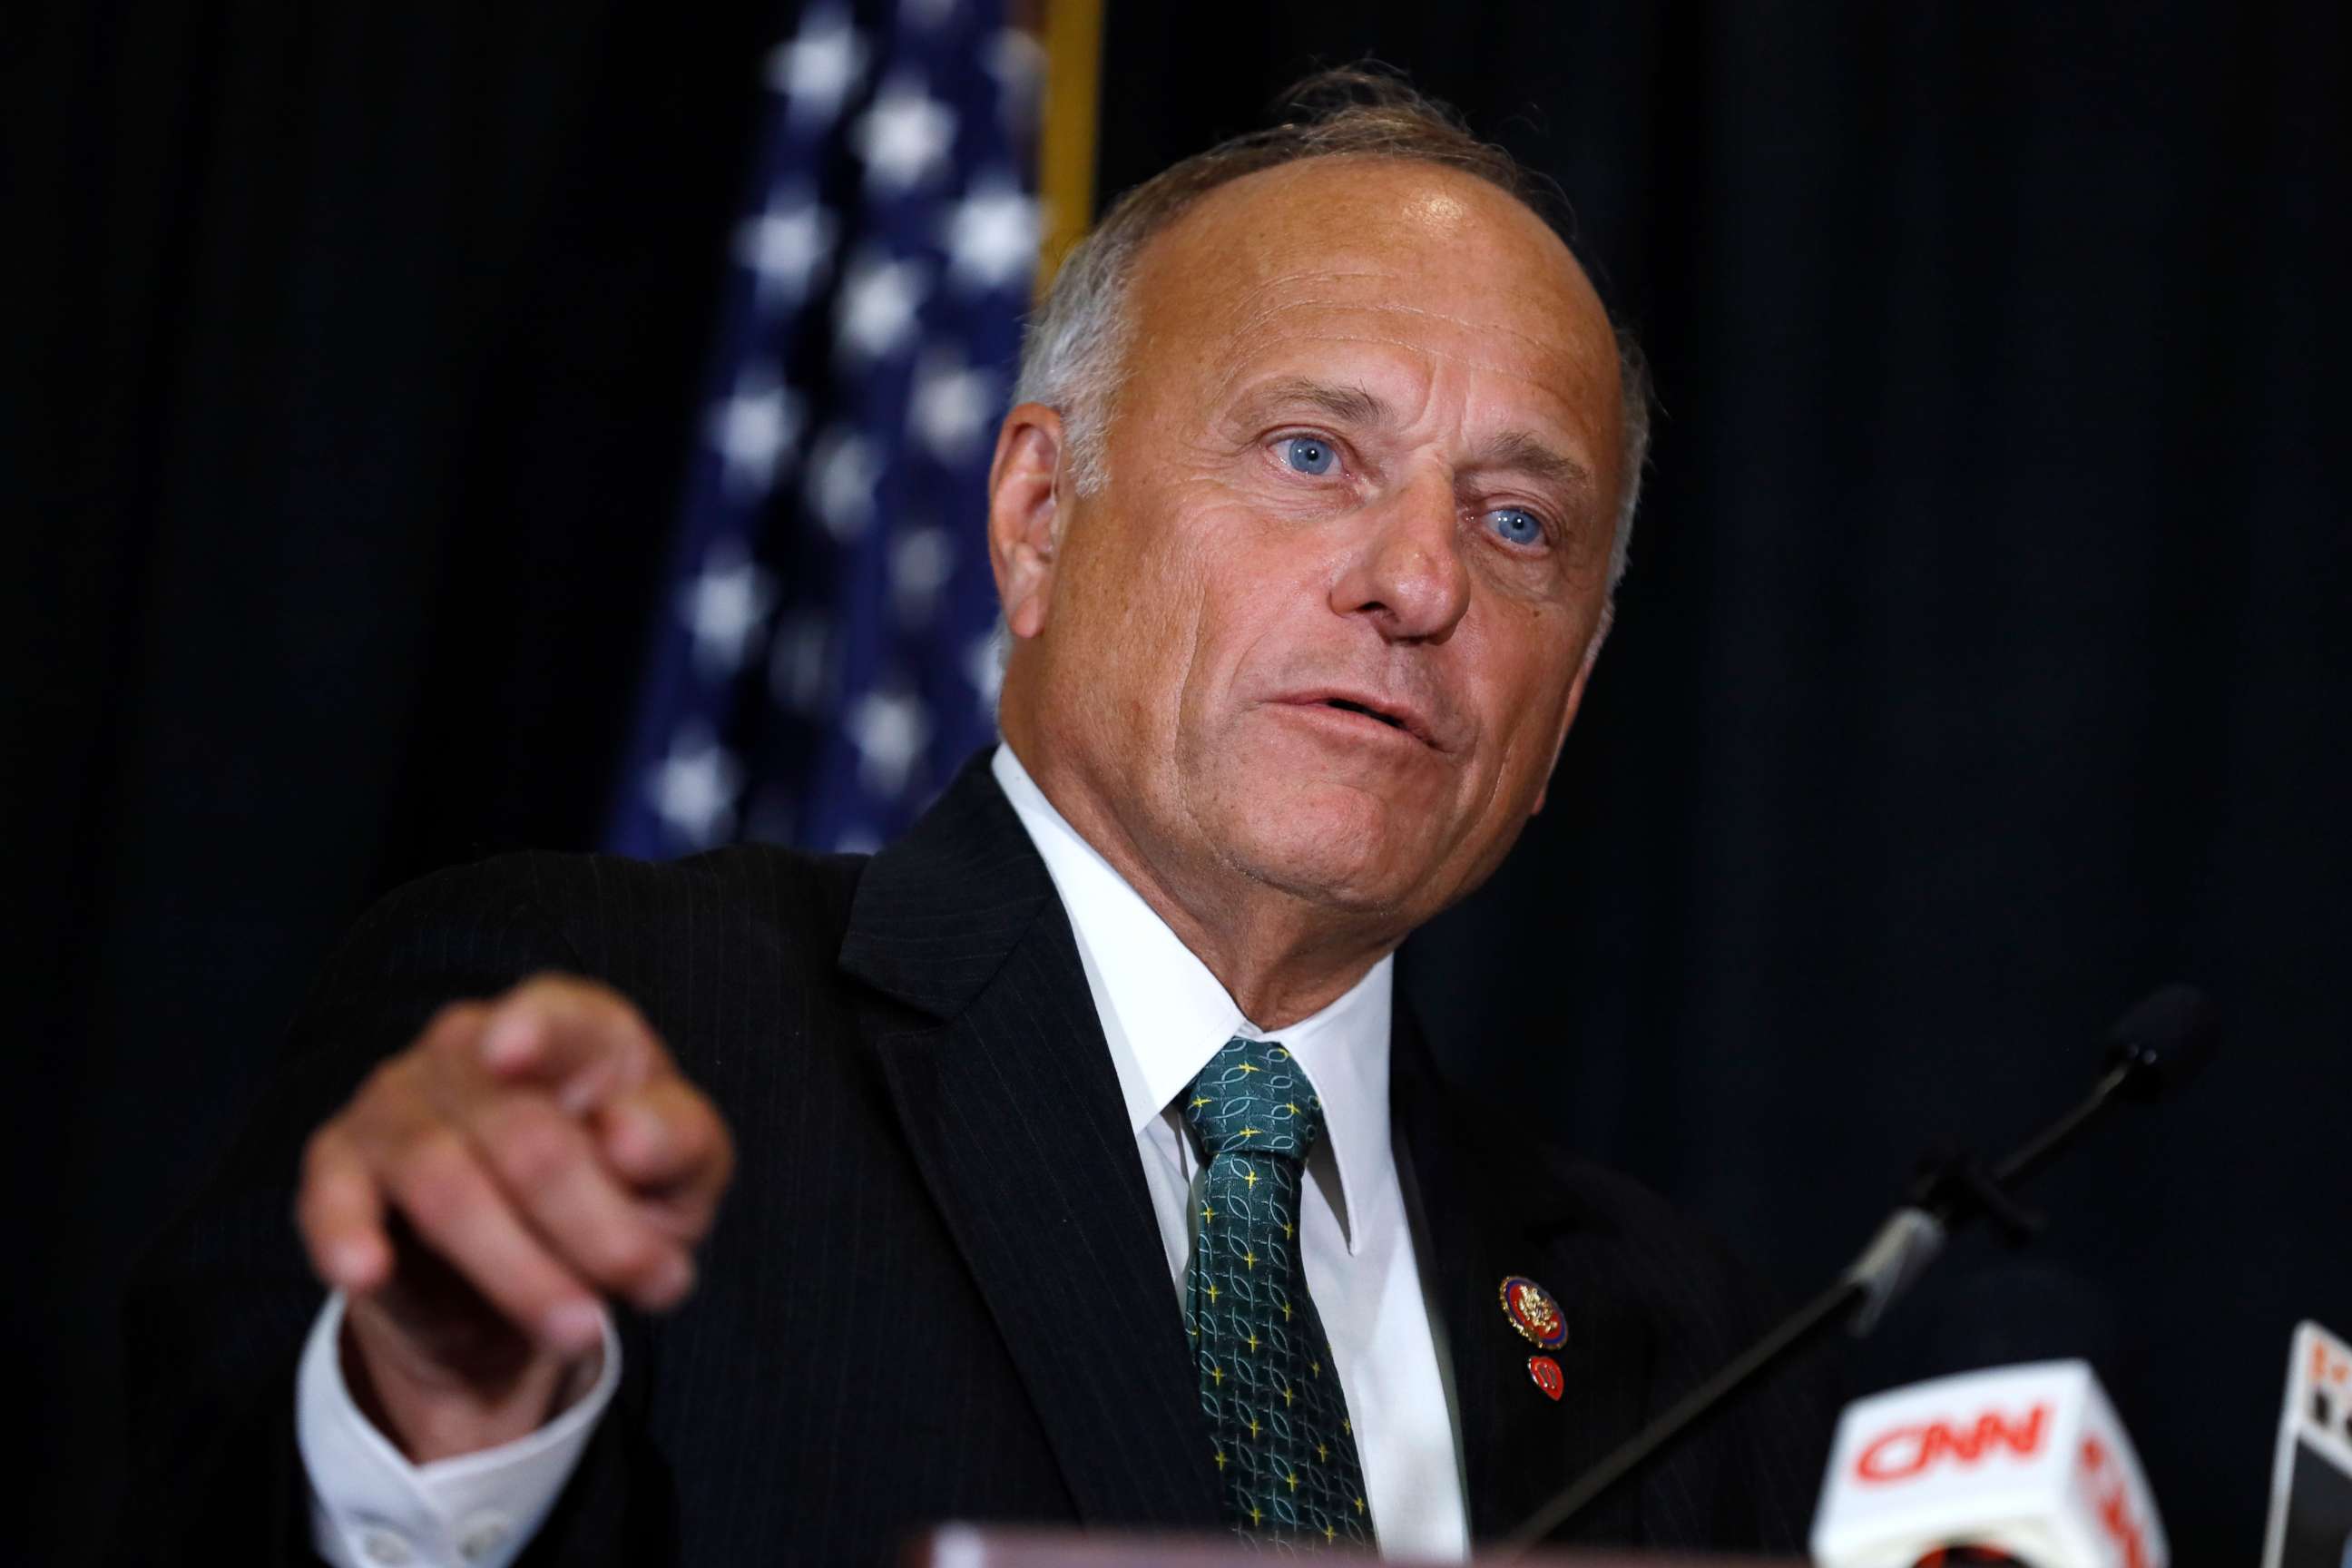 PHOTO: Rep. Steve King, R-Iowa, speaks during a news conference in Des Moines, Iowa, Aug. 23, 2019.